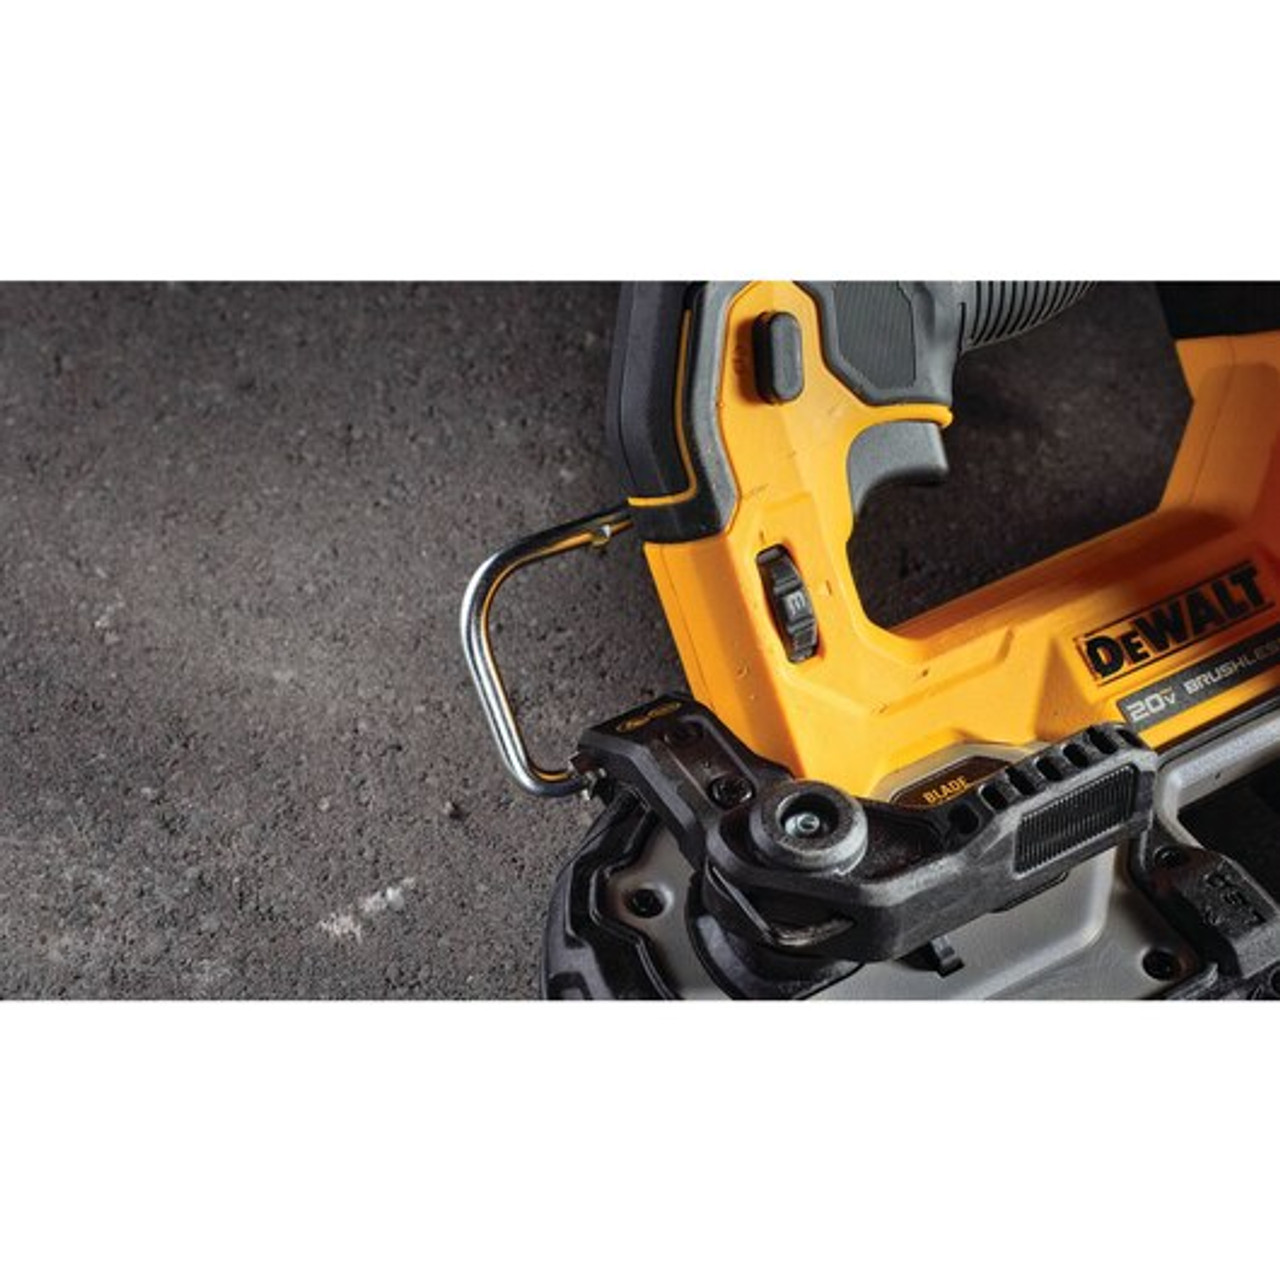 DeWALT ATOMICâ„¢ 20V MAX* Brushless Cordless 1-3/4 in. Compact Bandsaw (Tool Only) DCS377B